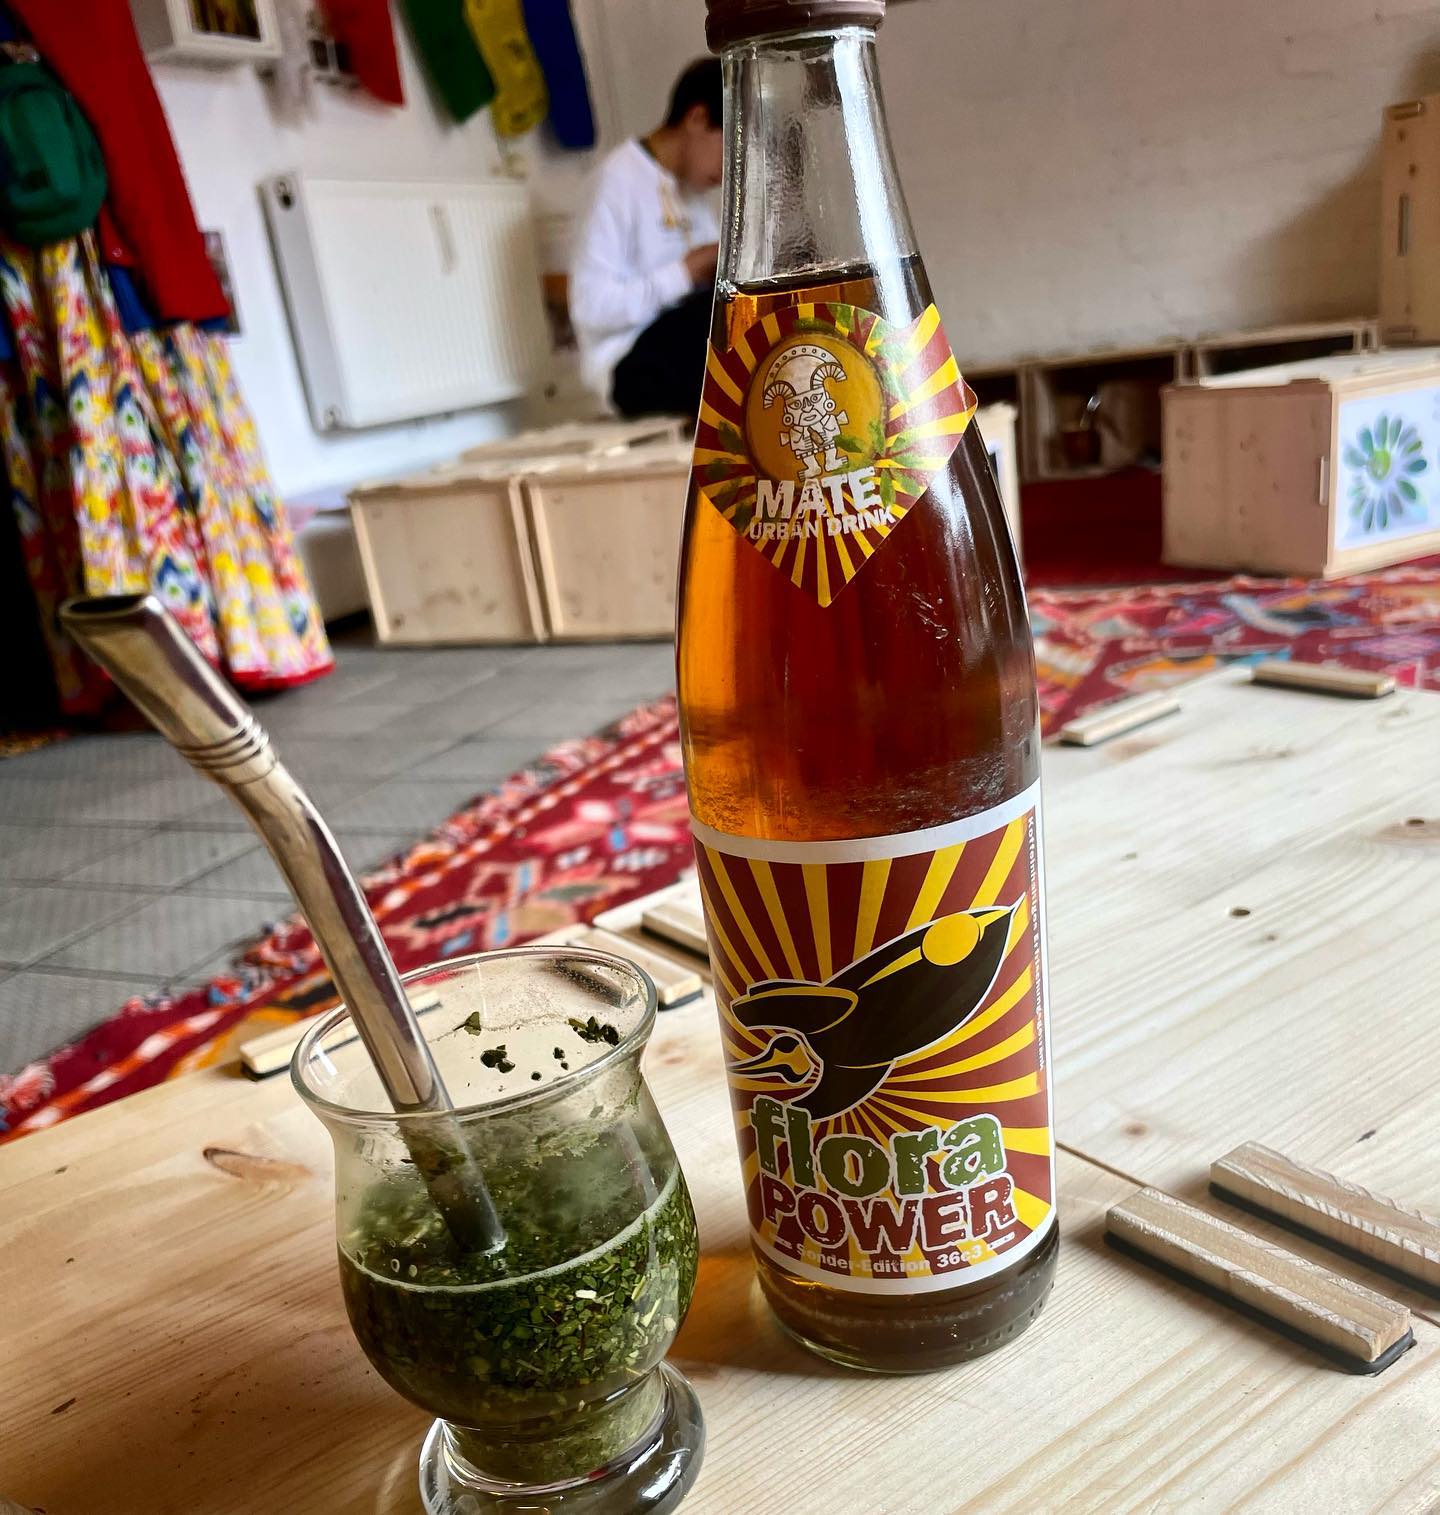 Mate: Argentina's National and Traditional Drink - Pampa Direct